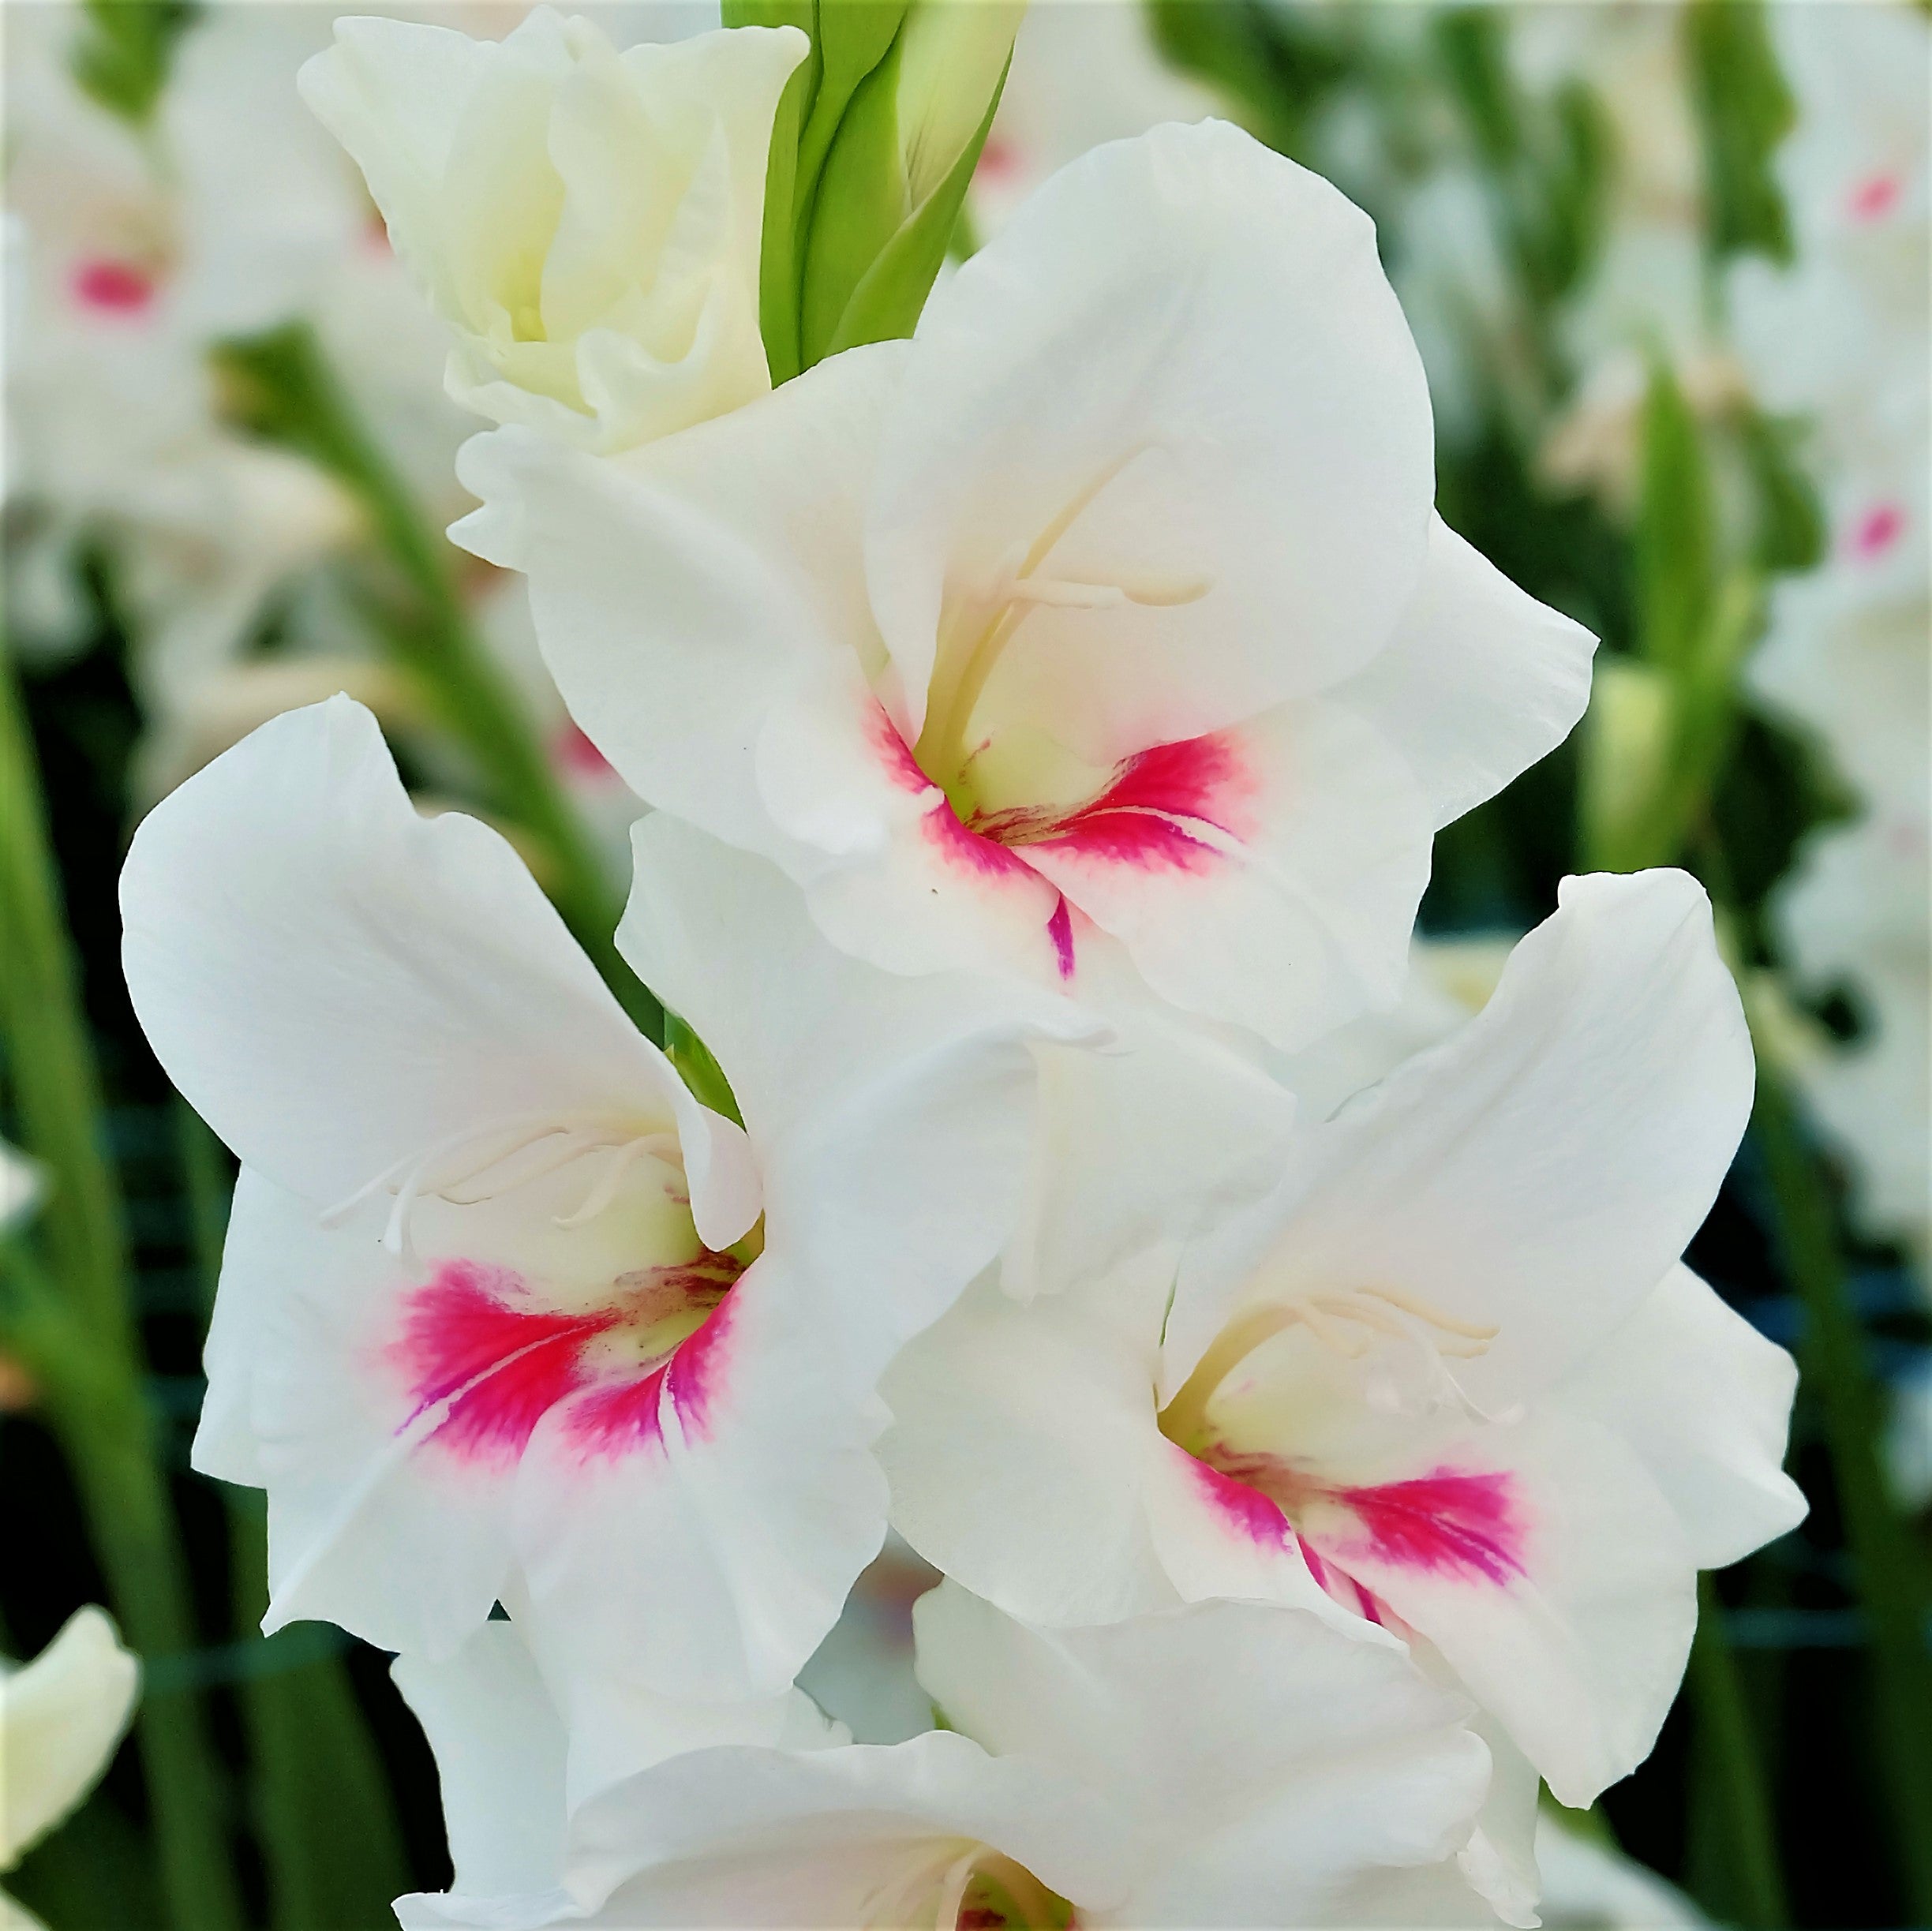 When To Plant Gladiolus Bulbs - Space them about 5 inches cut gladiolus ...